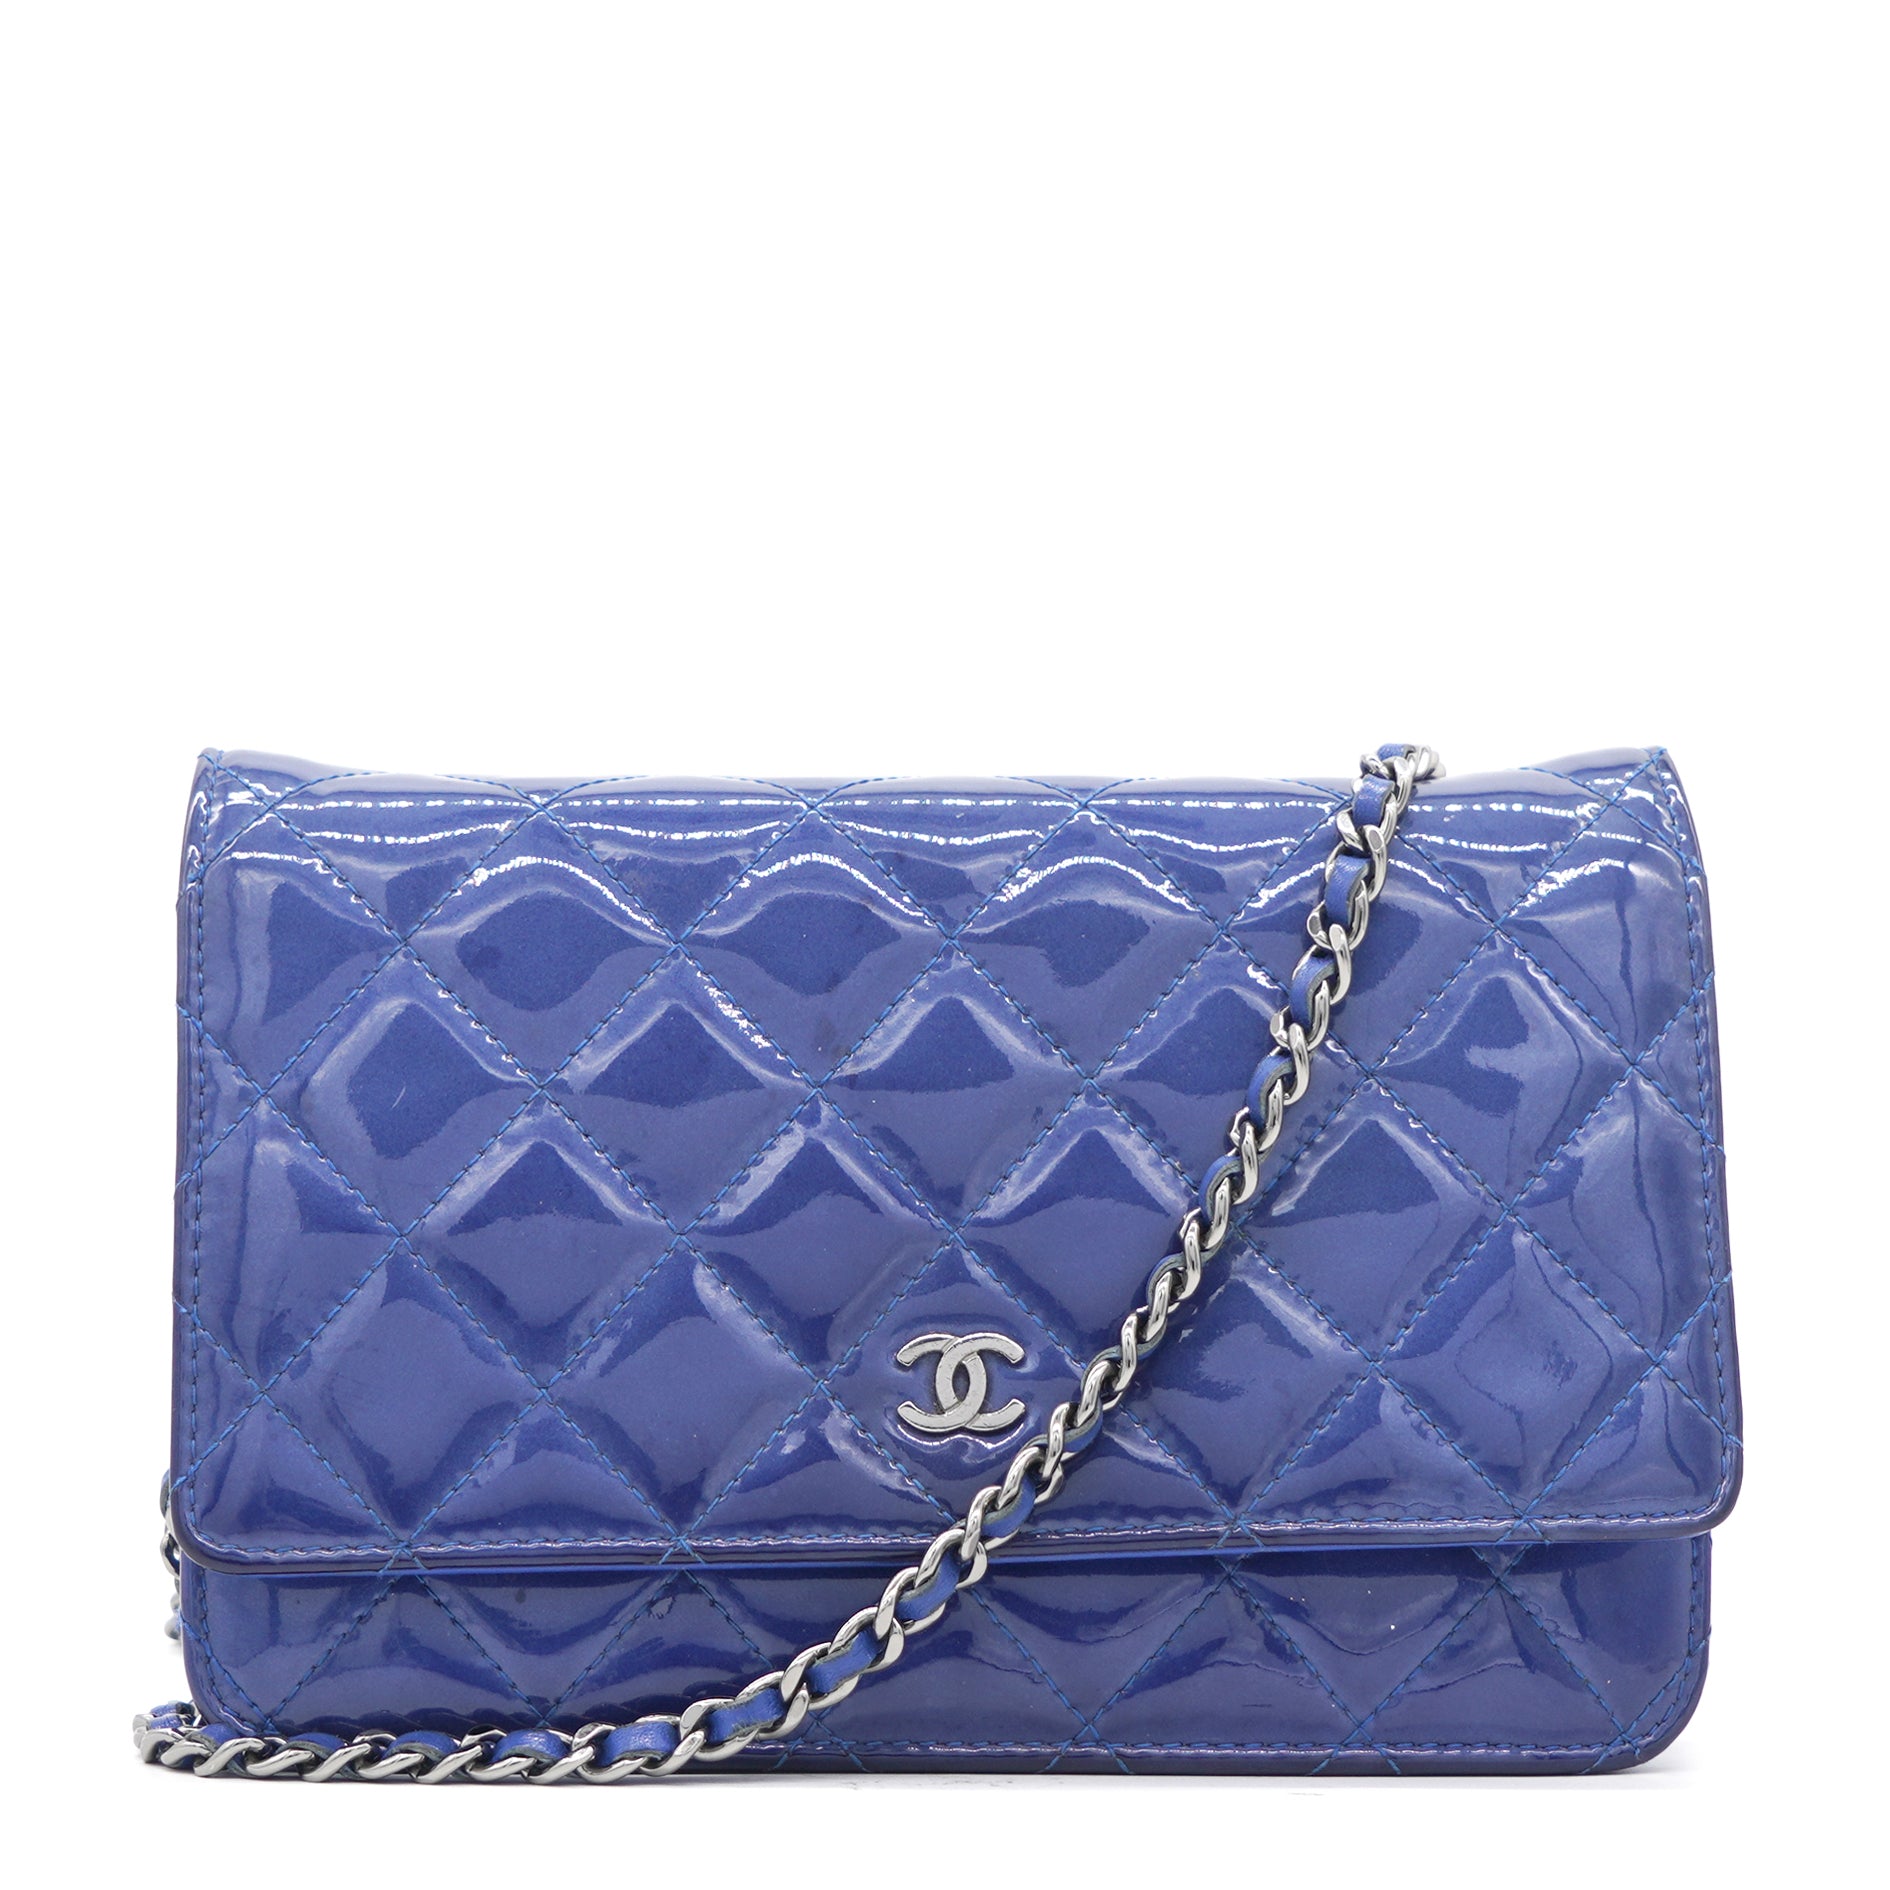 Chanel Gabrielle Wallet On Chain Shoulder Bag in Blue And Black